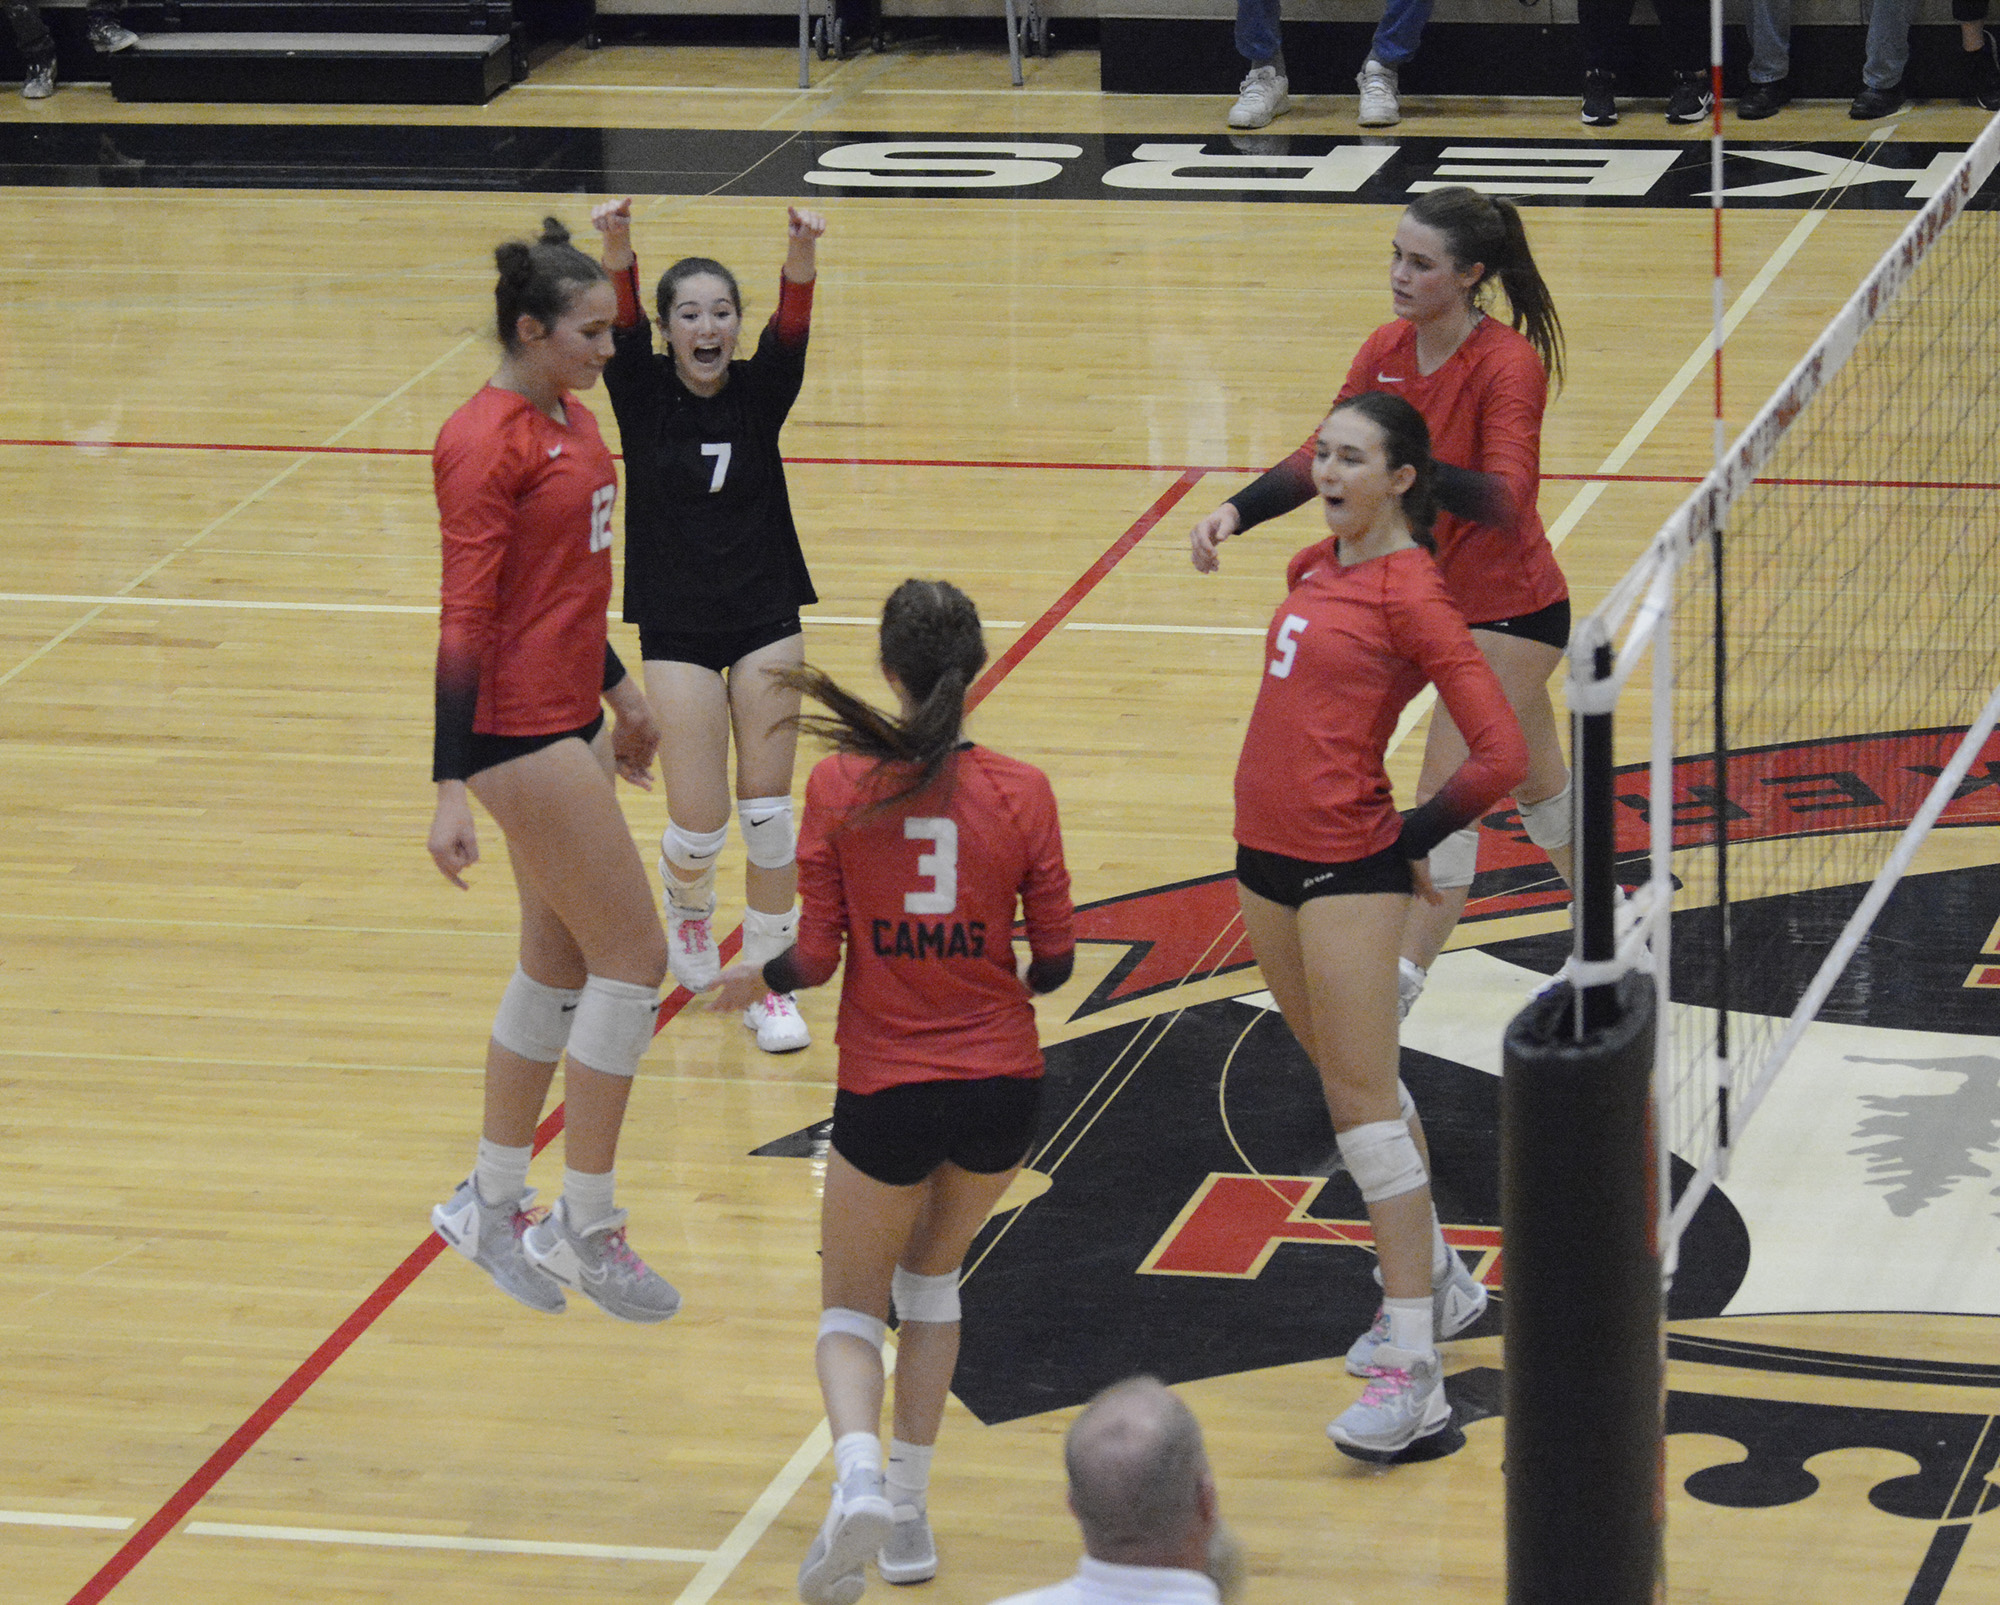 Members of the Camas volleyball team celebrate a point during the Papermakers' win over Skyview at Camas High School on Thursday, Oct. 27, 2022.